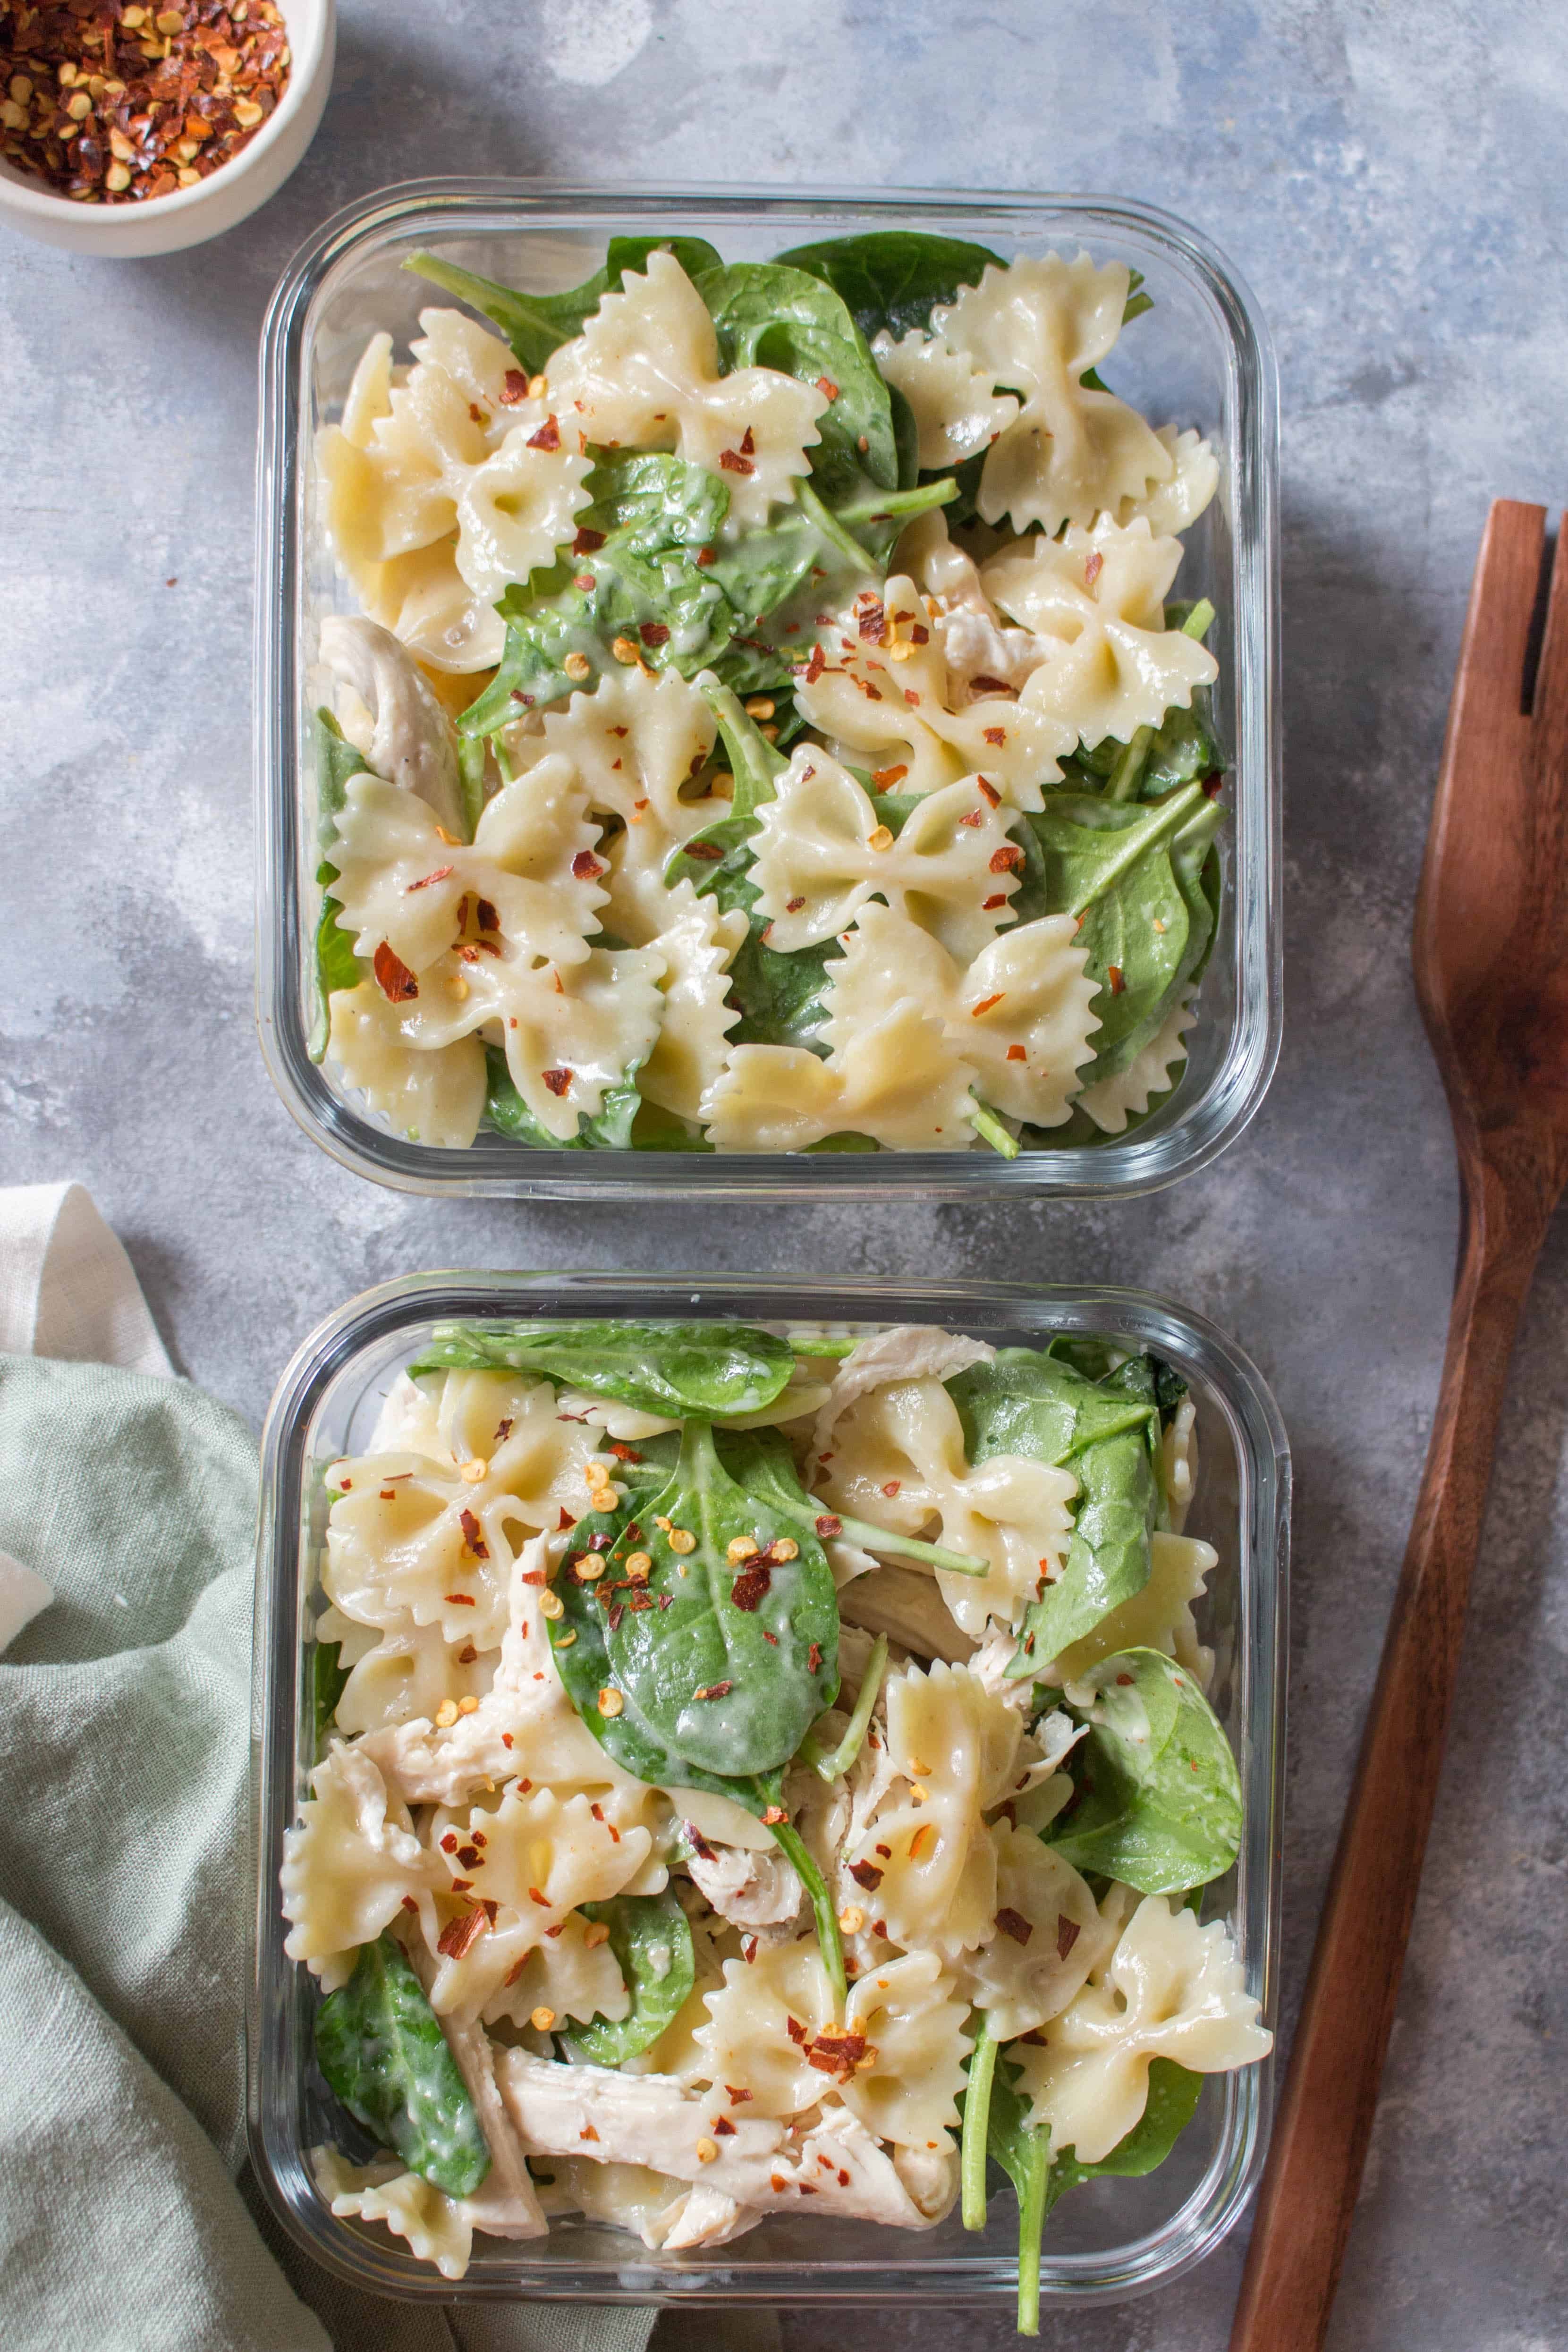 Cold Chicken Spinach Pasta Salad -   22 fitness meals work lunches
 ideas